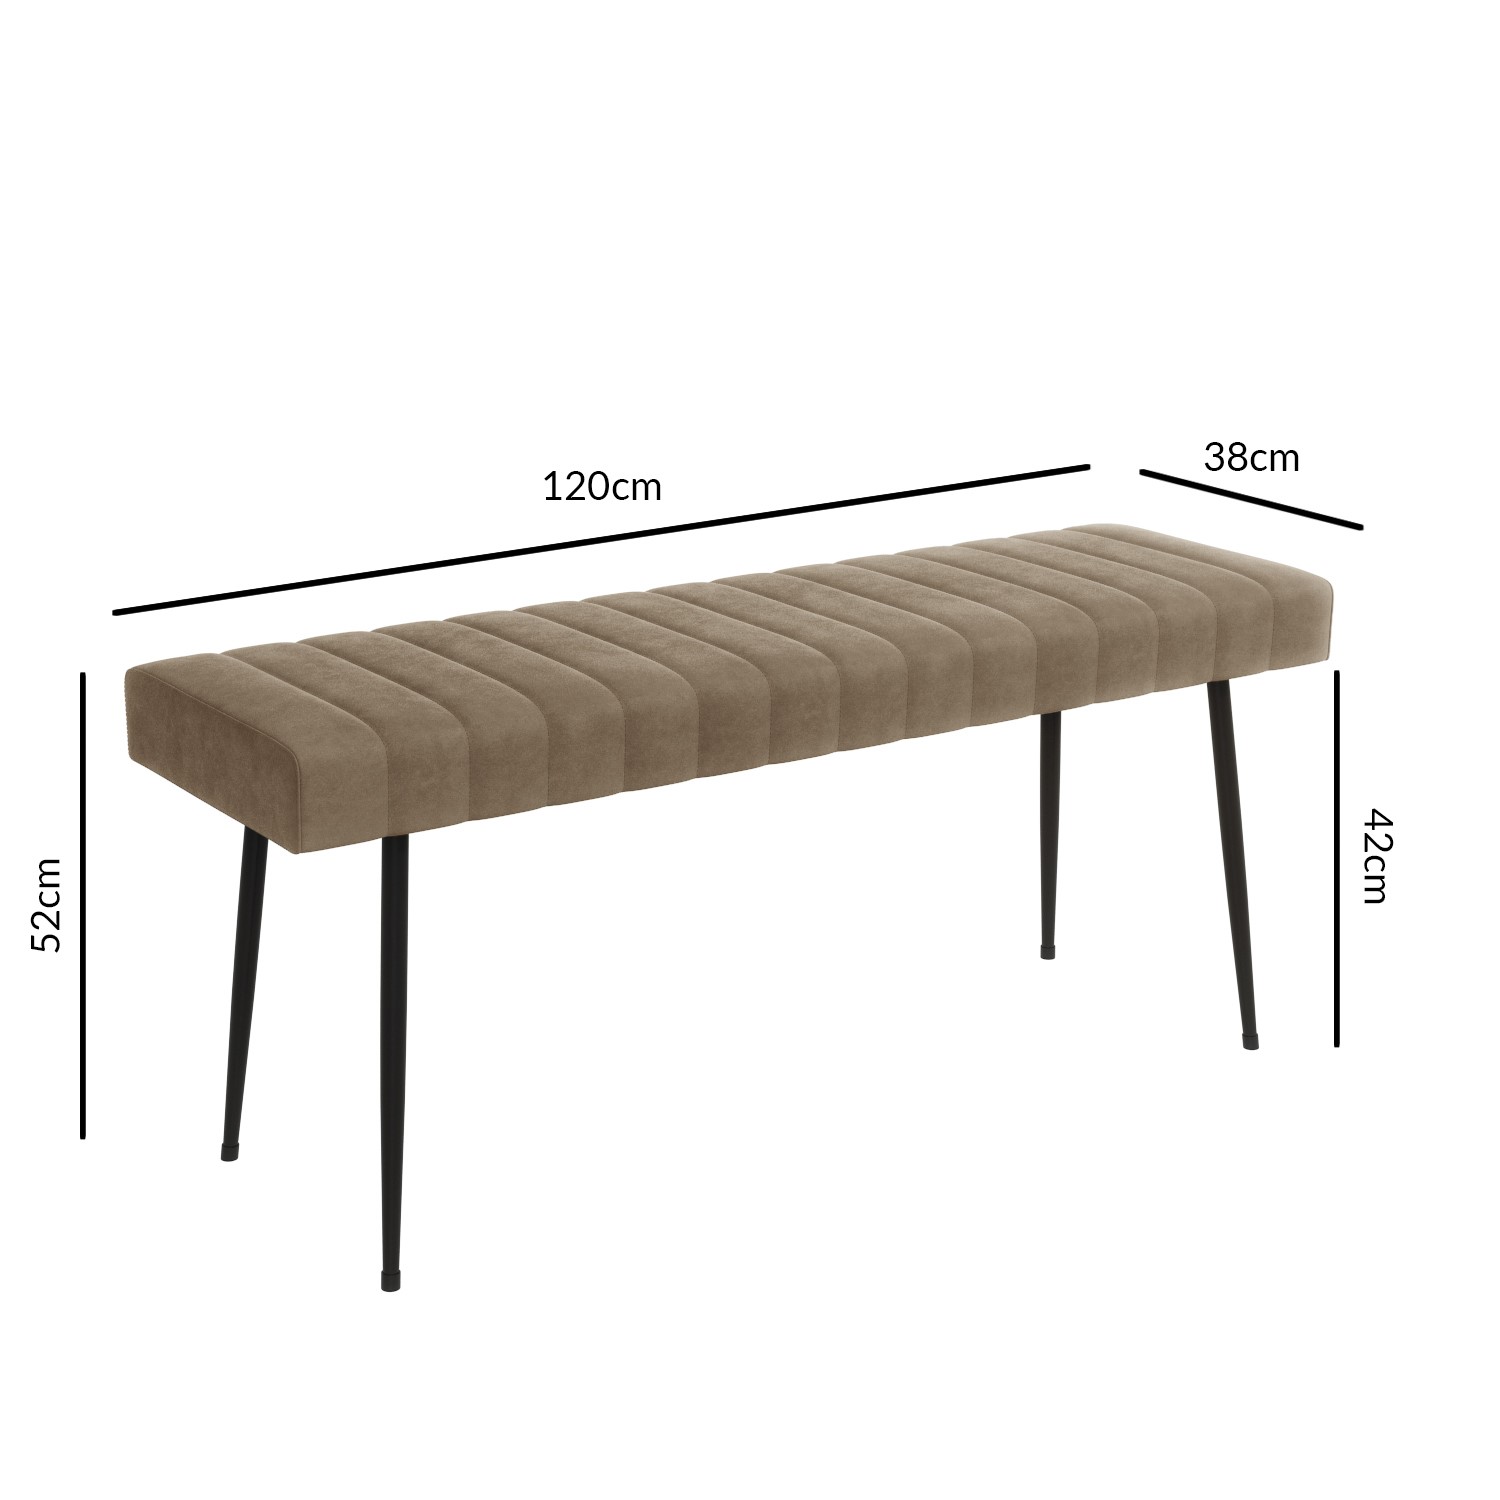 Read more about Large beige faux leather dining bench seats 2 logan